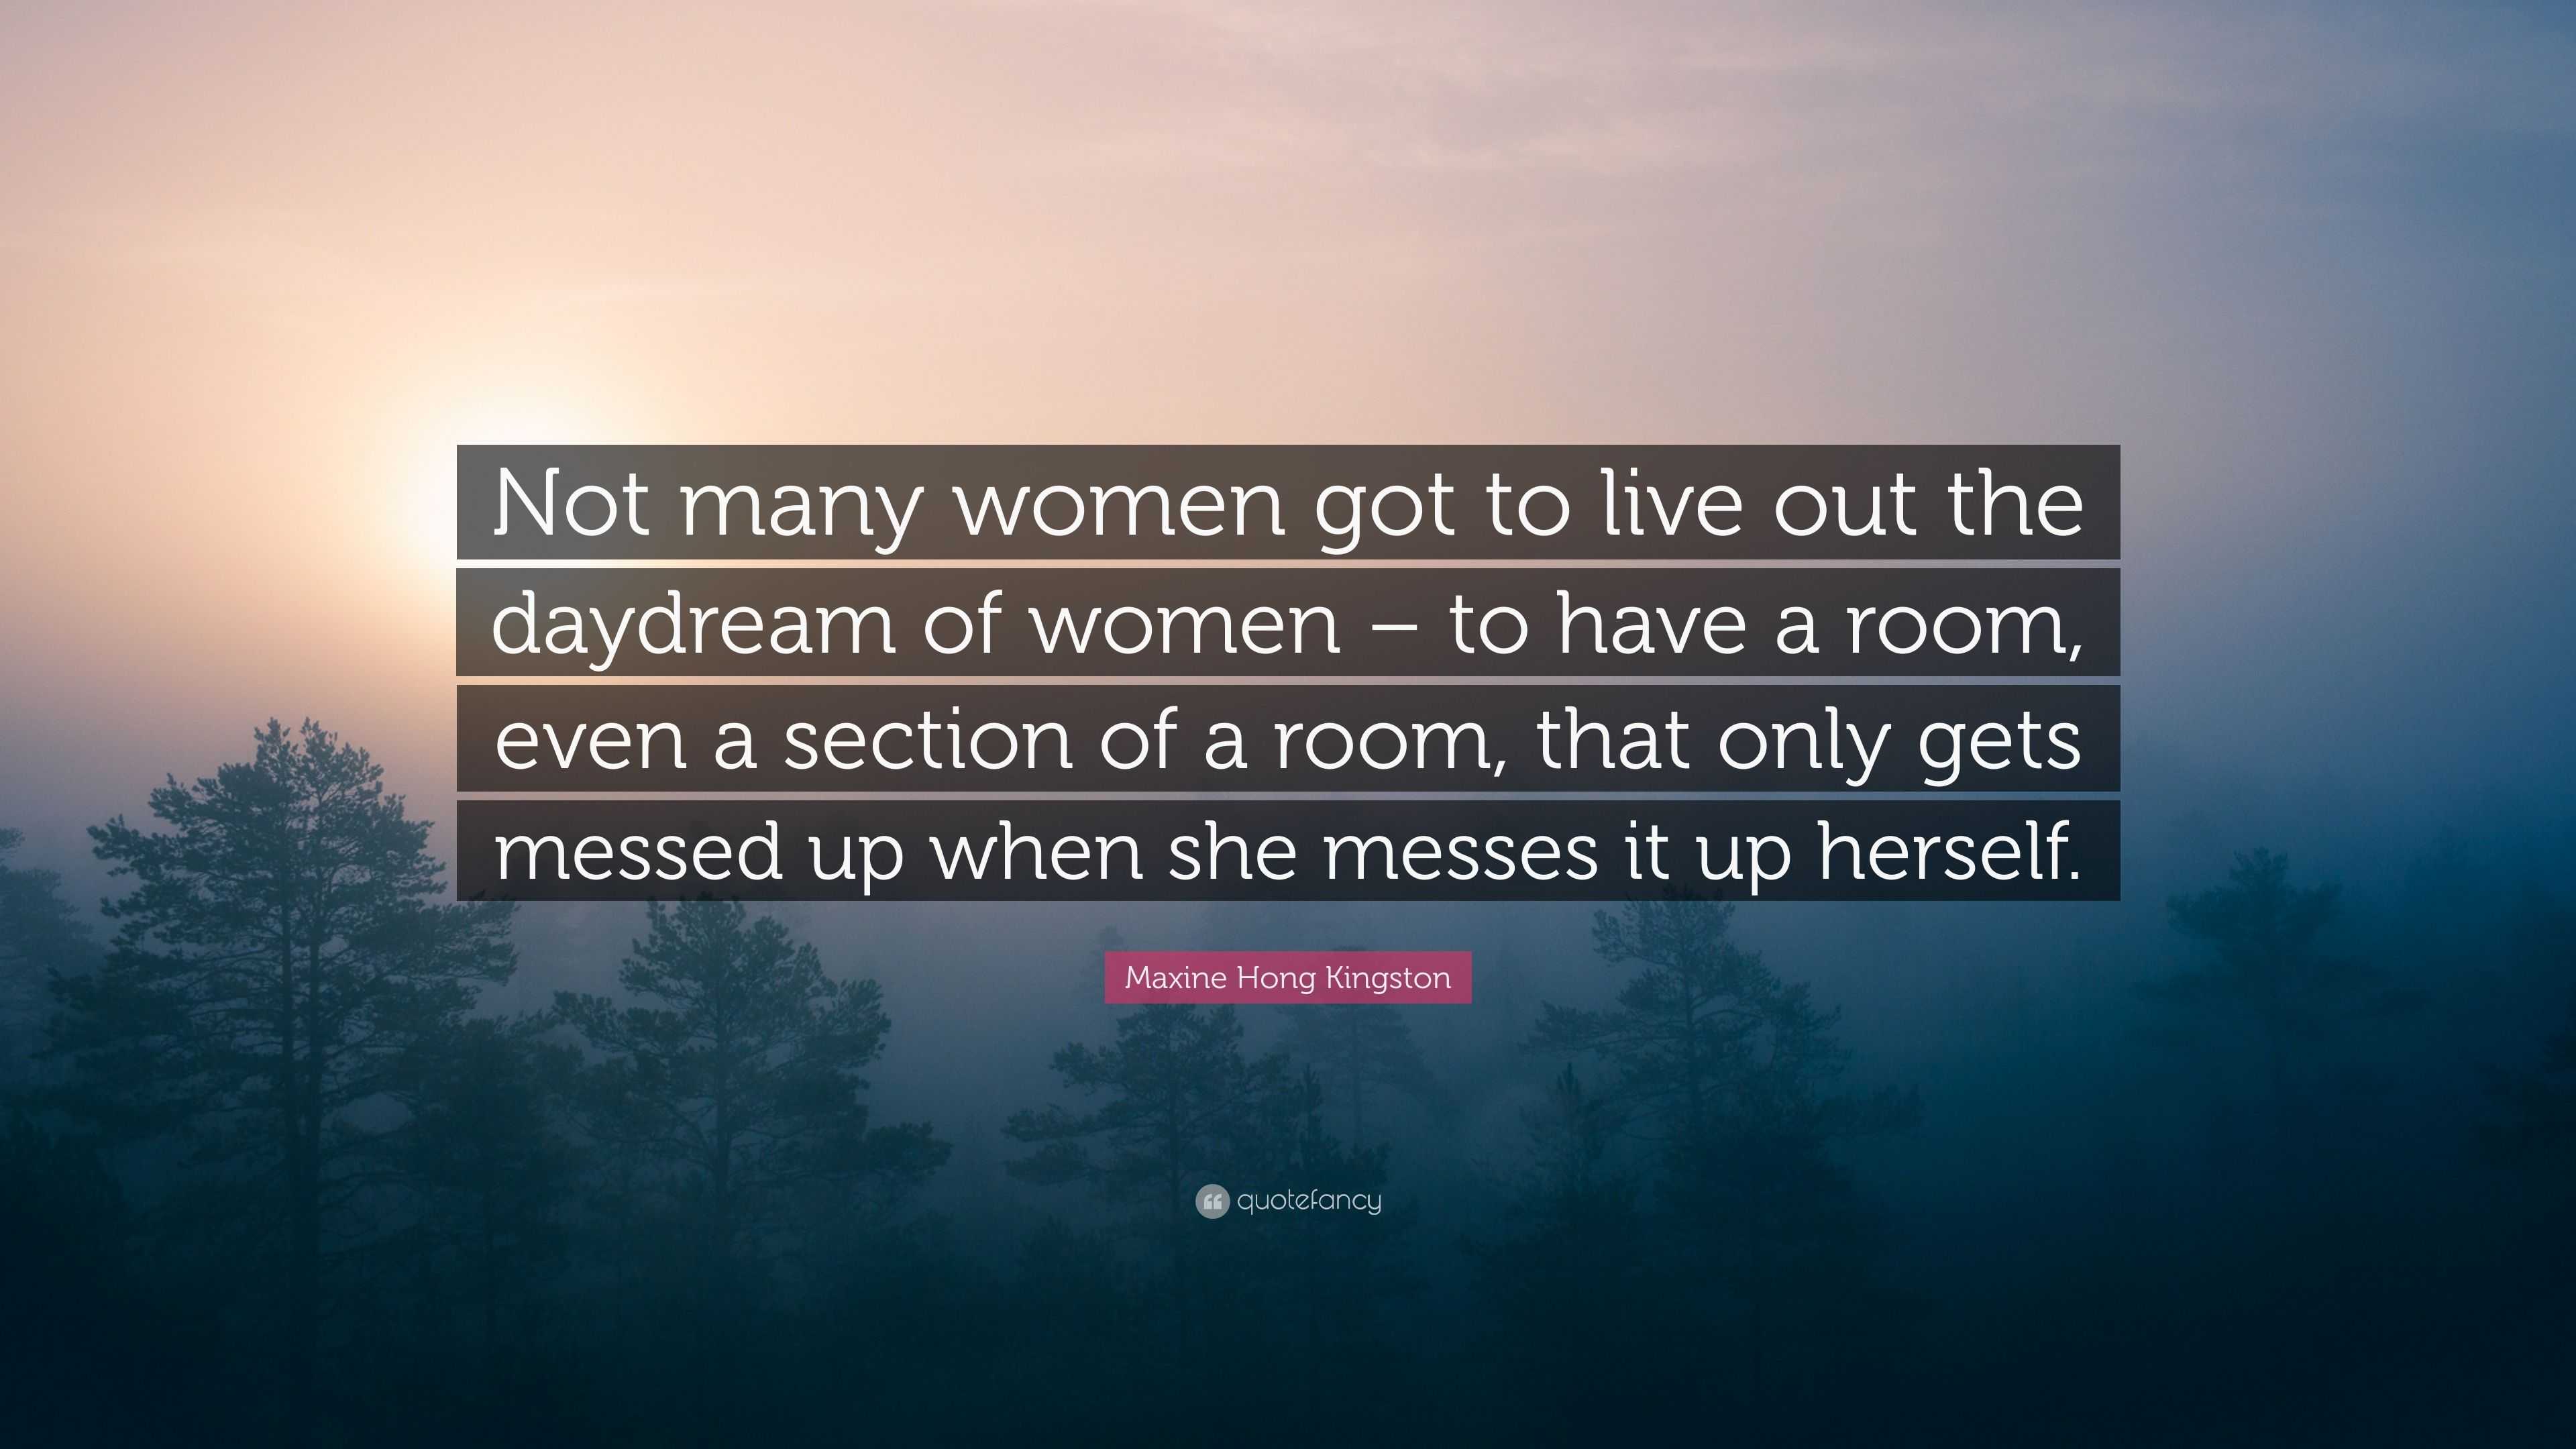 Maxine Hong Kingston Quote: “Not many women got to live out the ...